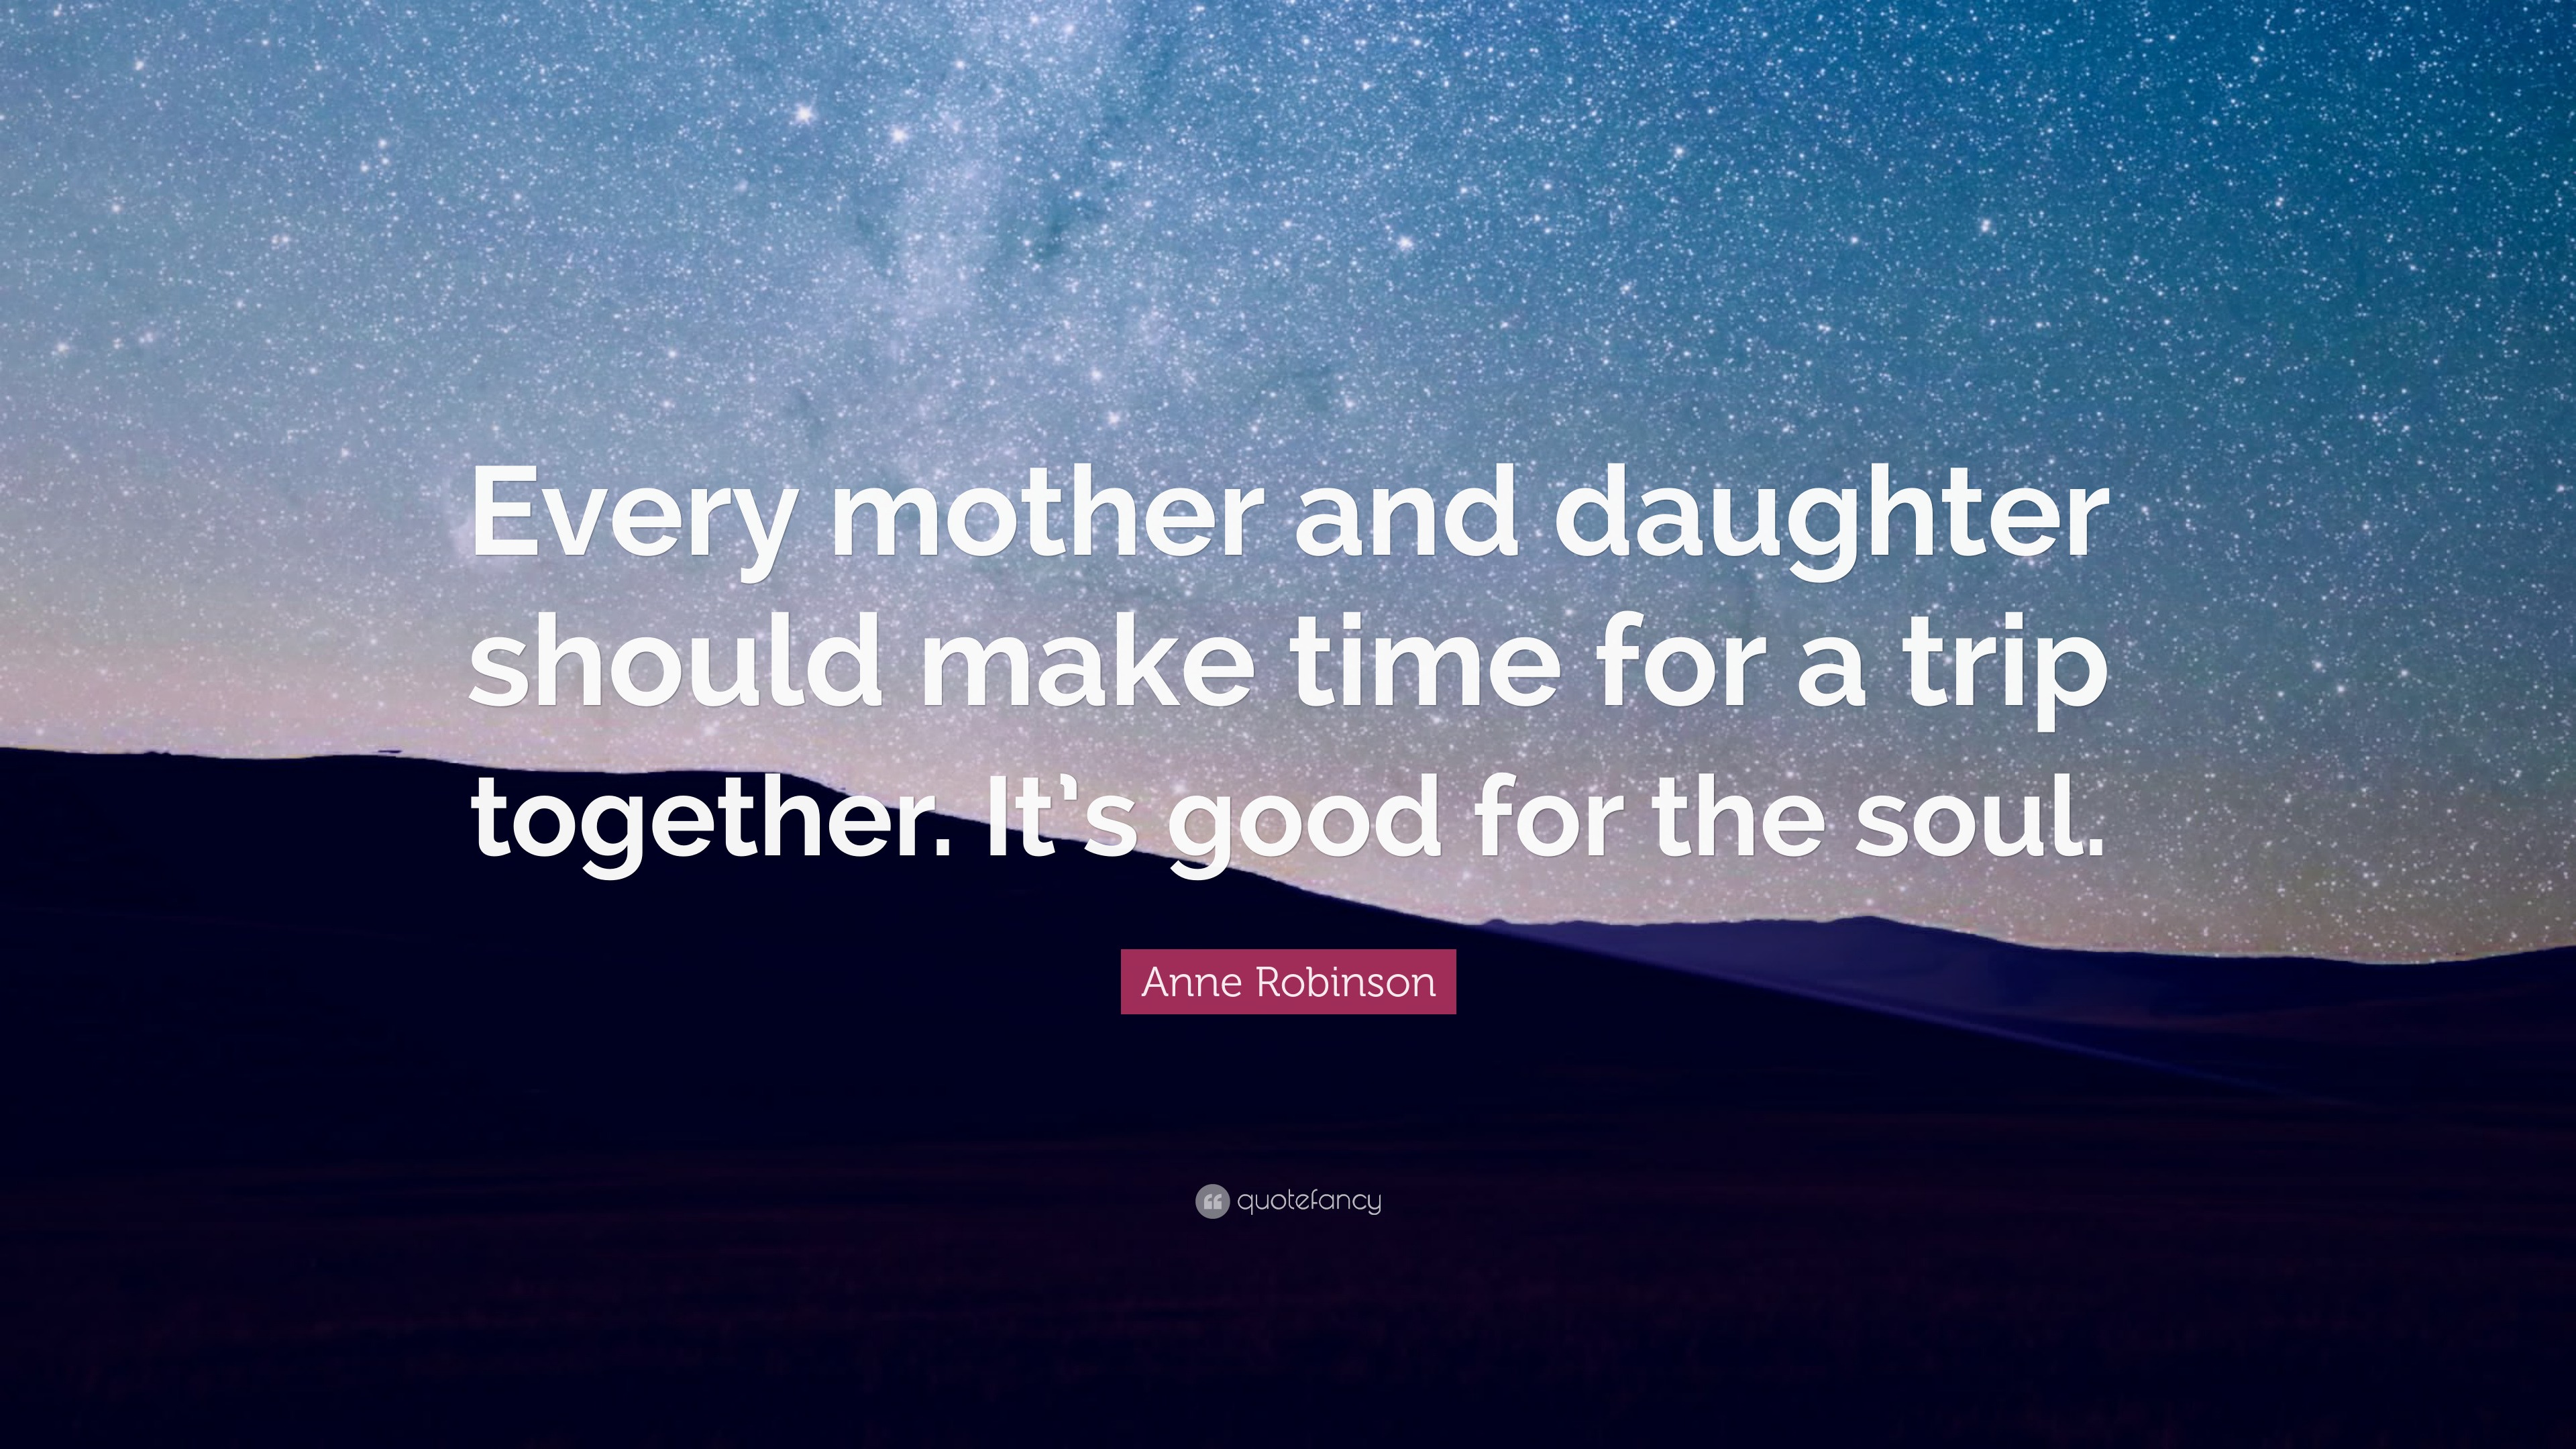 Best Mother Daughter Travel Quotes of the decade Check it out now 